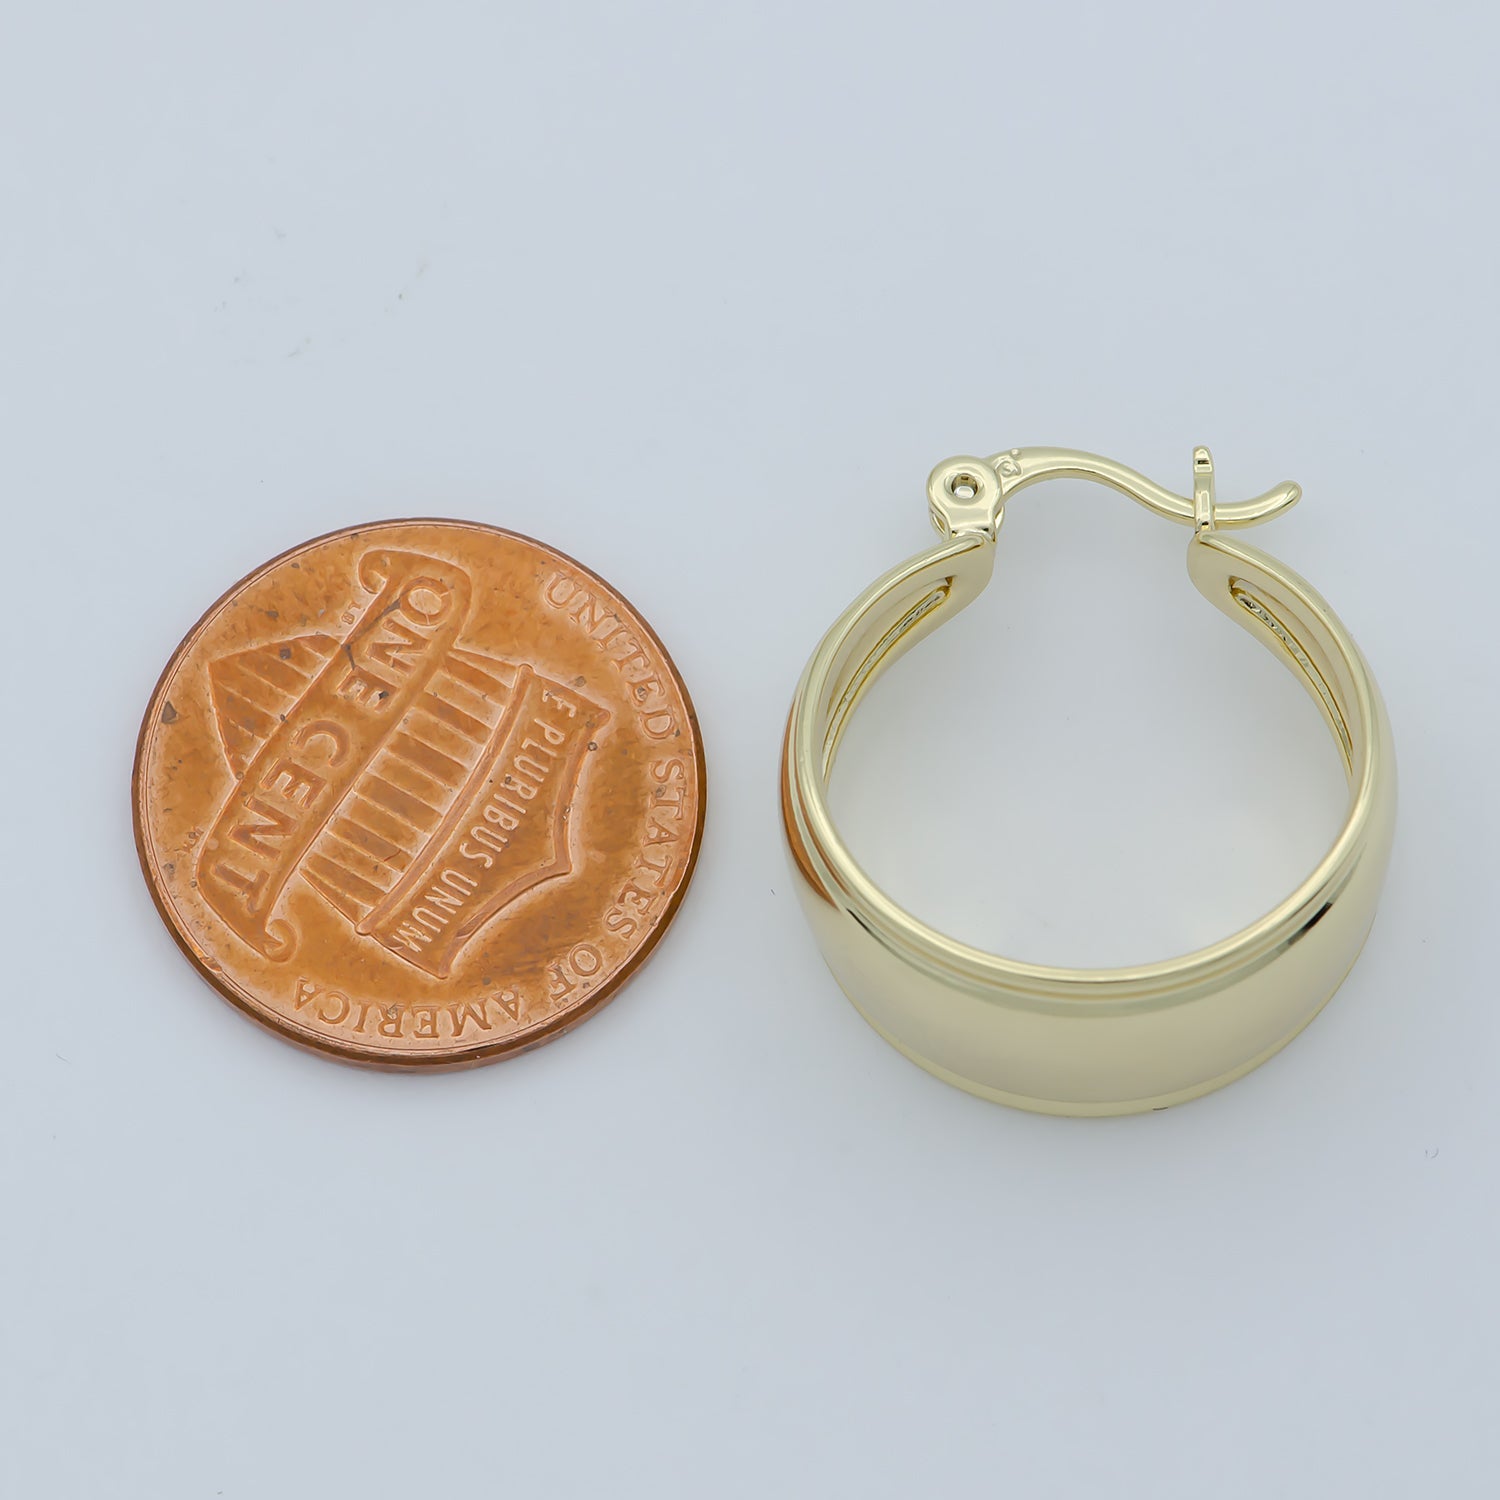 1pair Golden Simple Round Huggies Earrings, Plain Gold Filled Geometric Formal/Casual Daily Wear Earring Jewelry P256 - DLUXCA